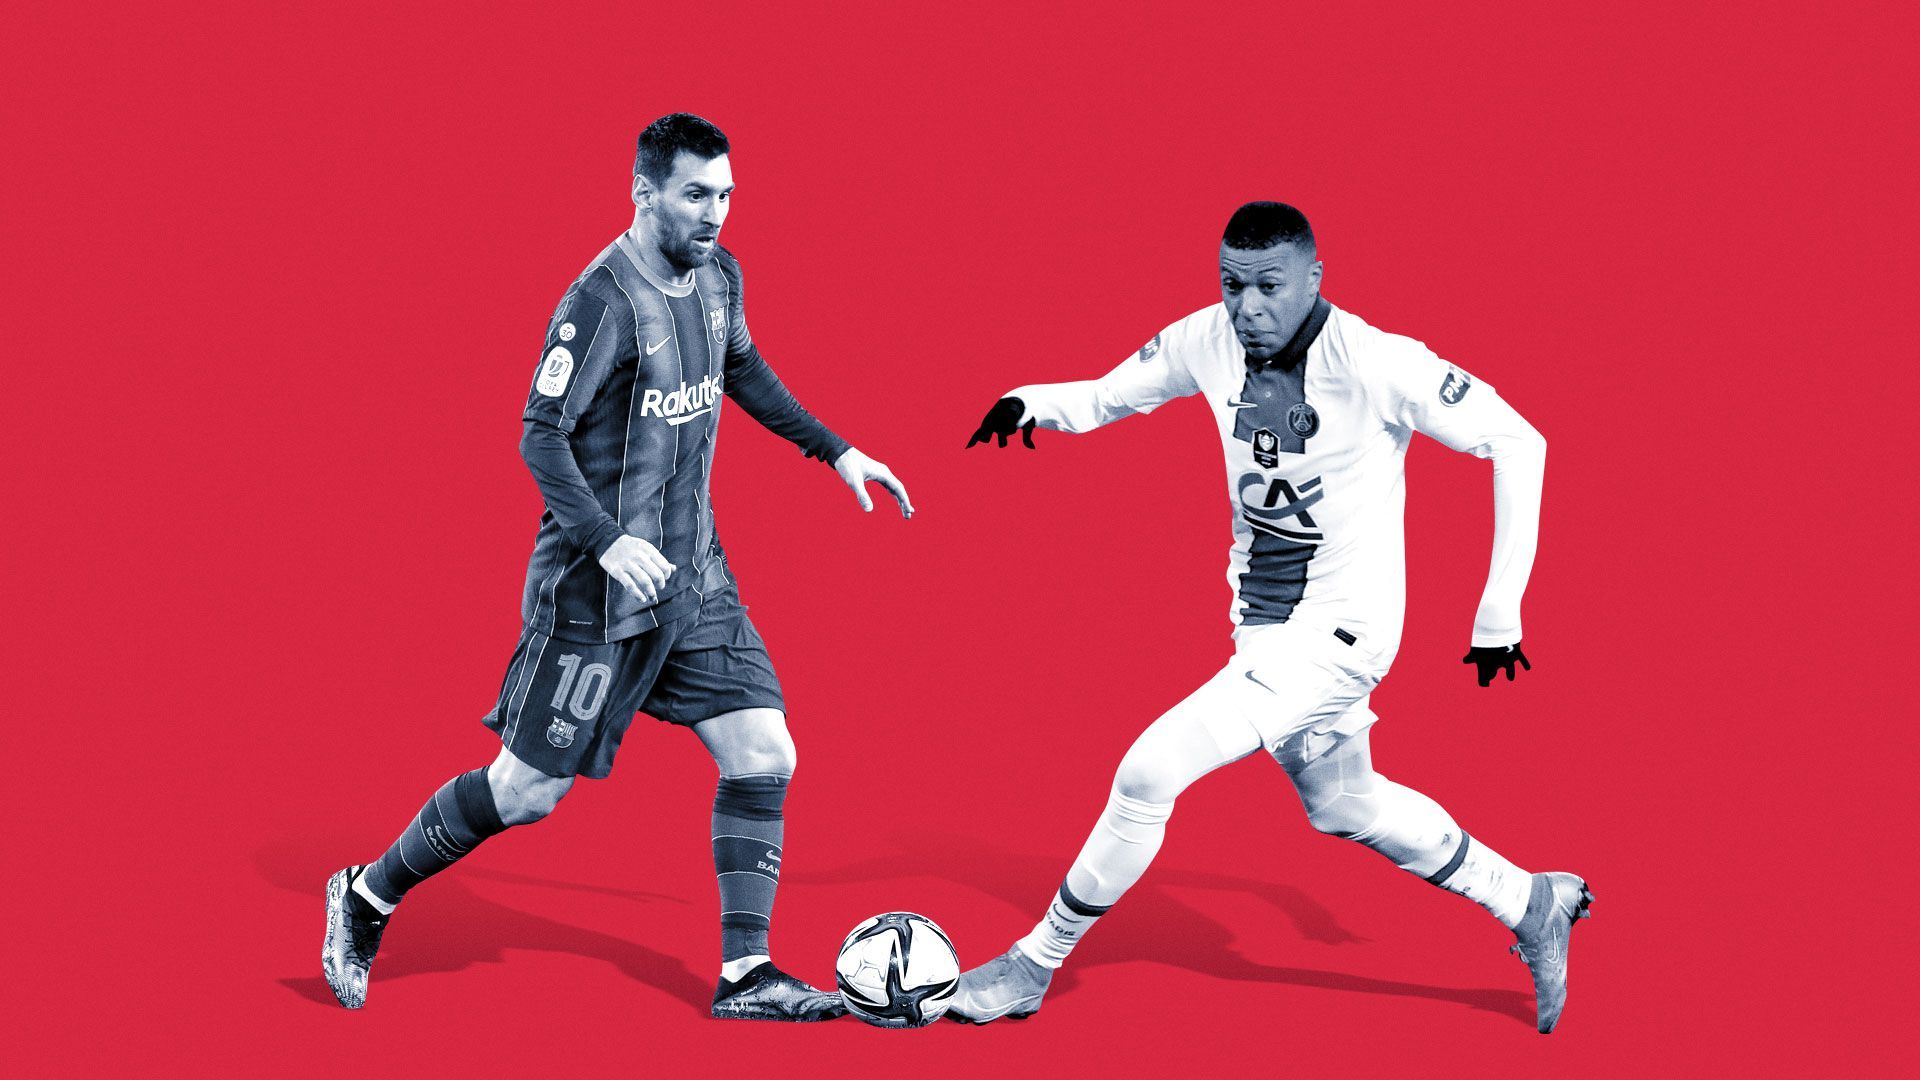 Photo illustration of Lionel Messi and Kylian Mbappé